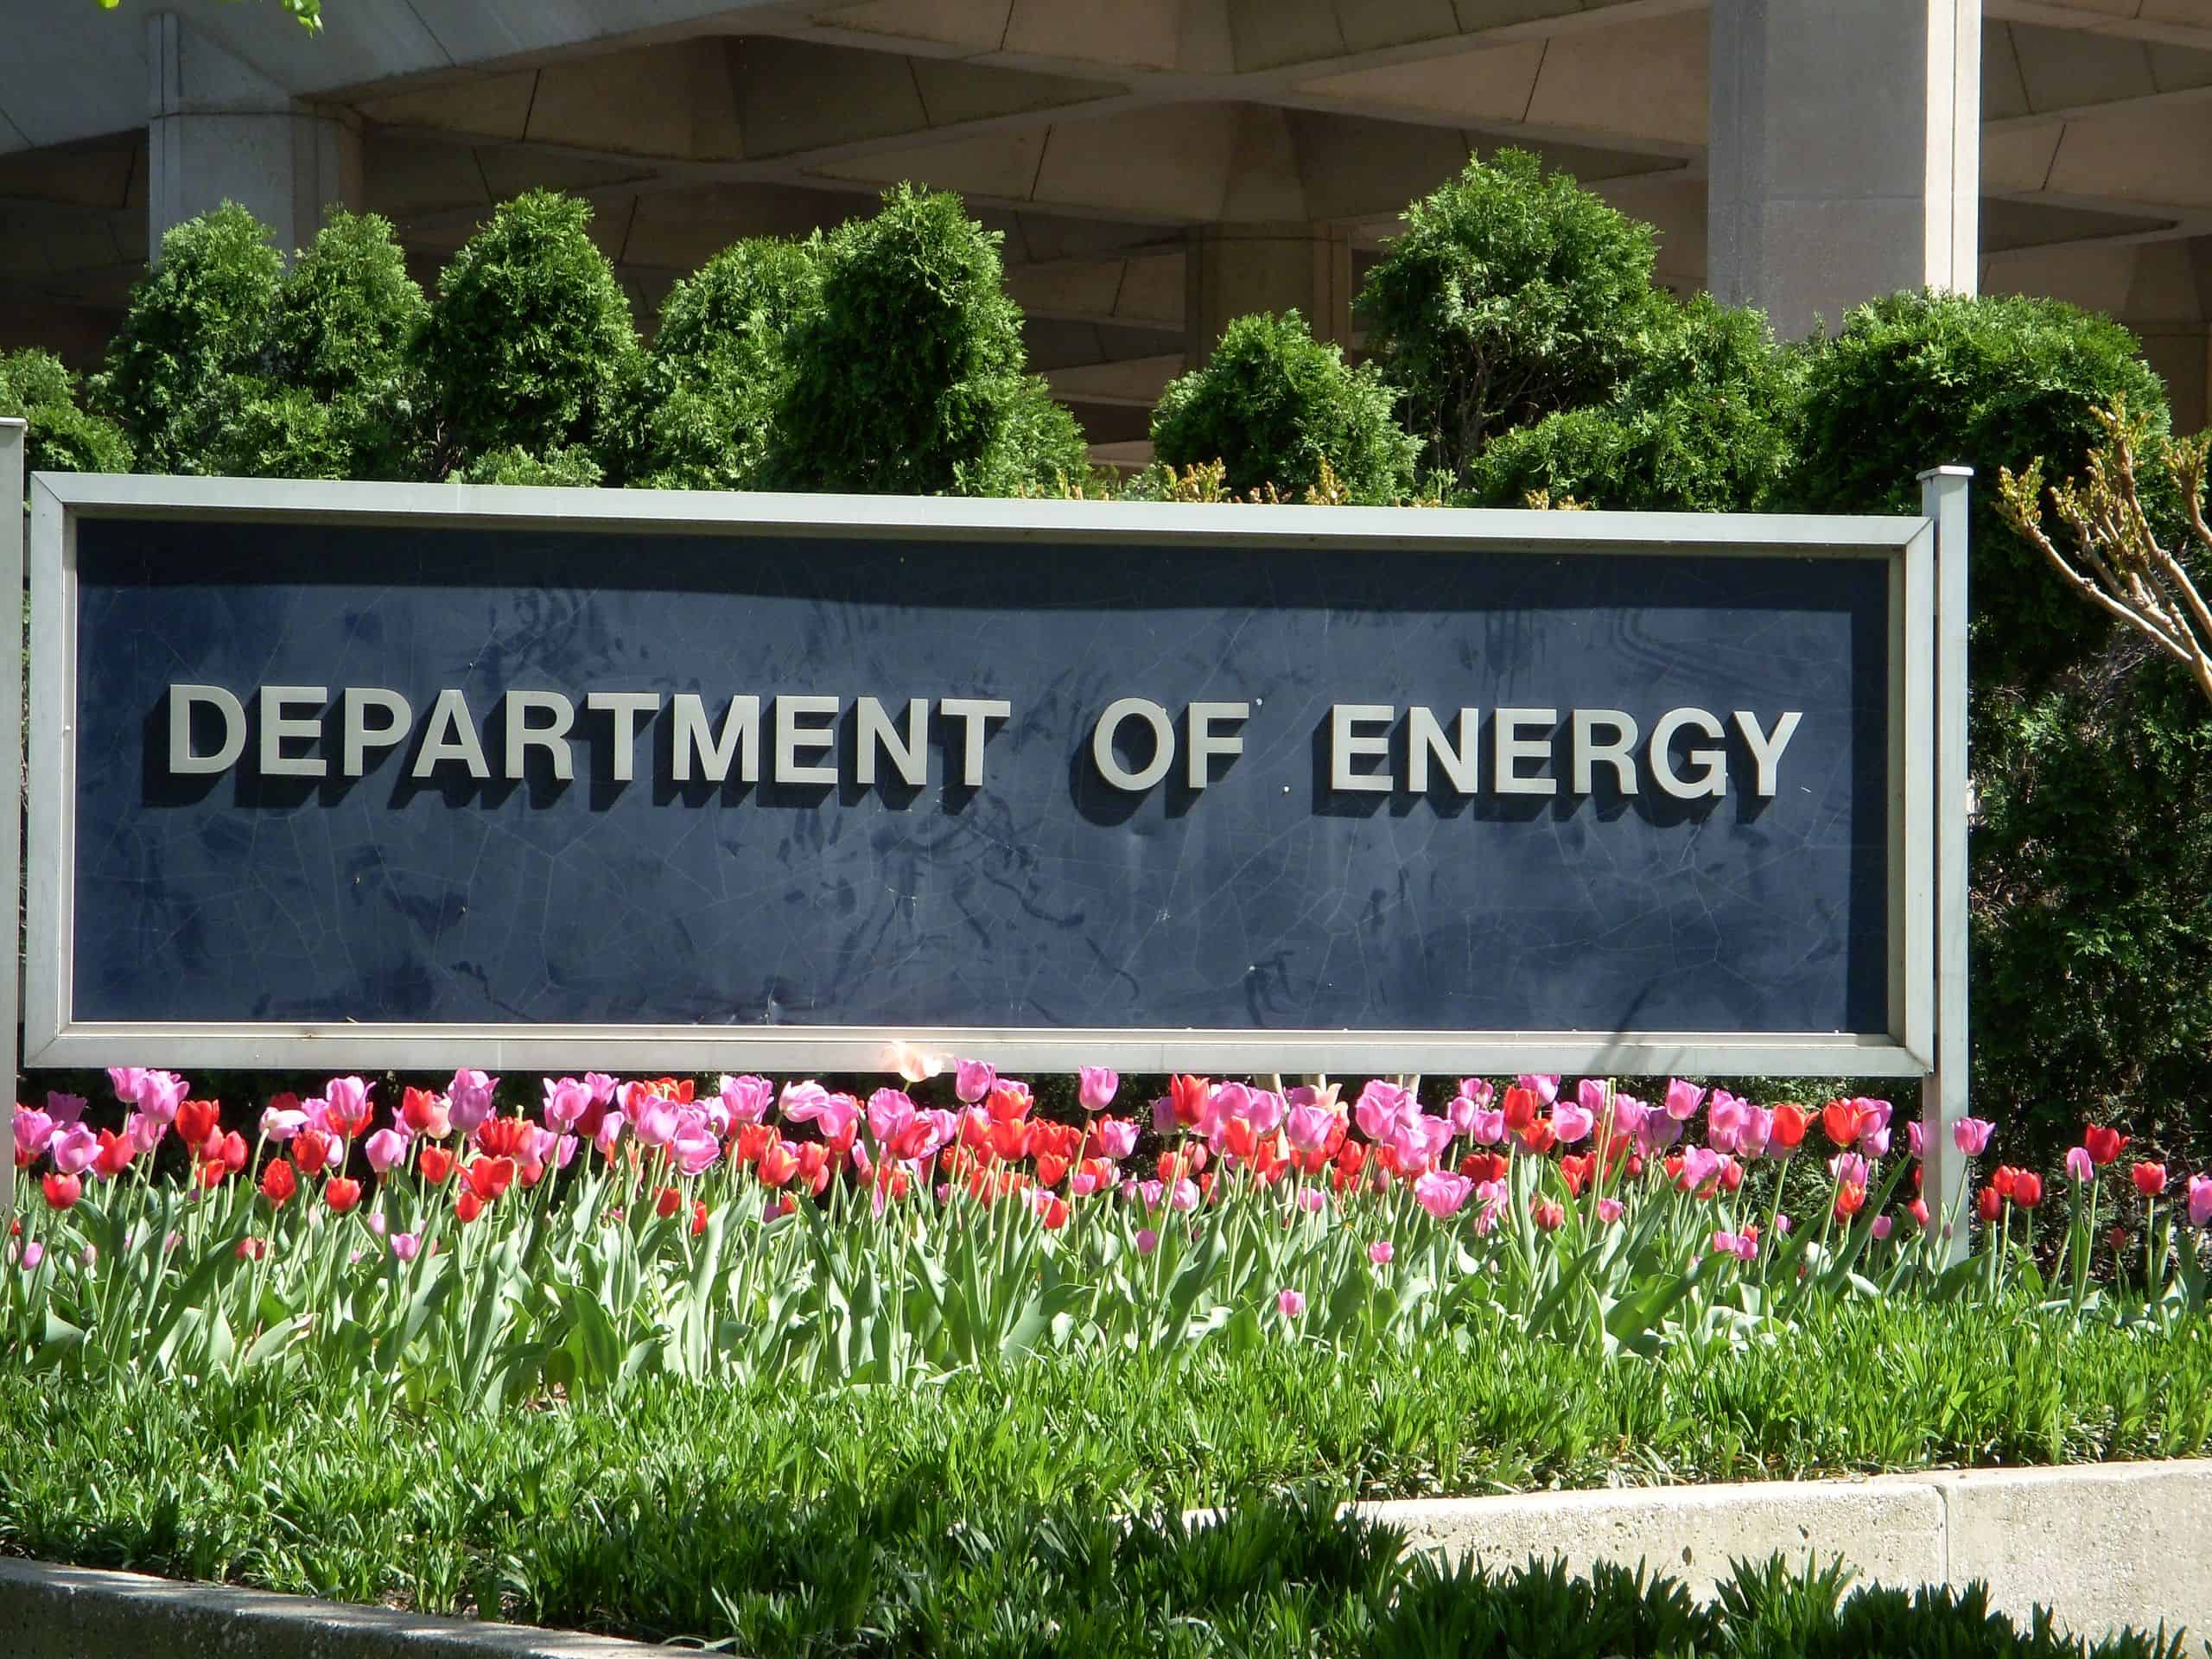 Sign at the James V Forrestal Building for the headquarters of the United States Department of Energy in Southwest Washington DC